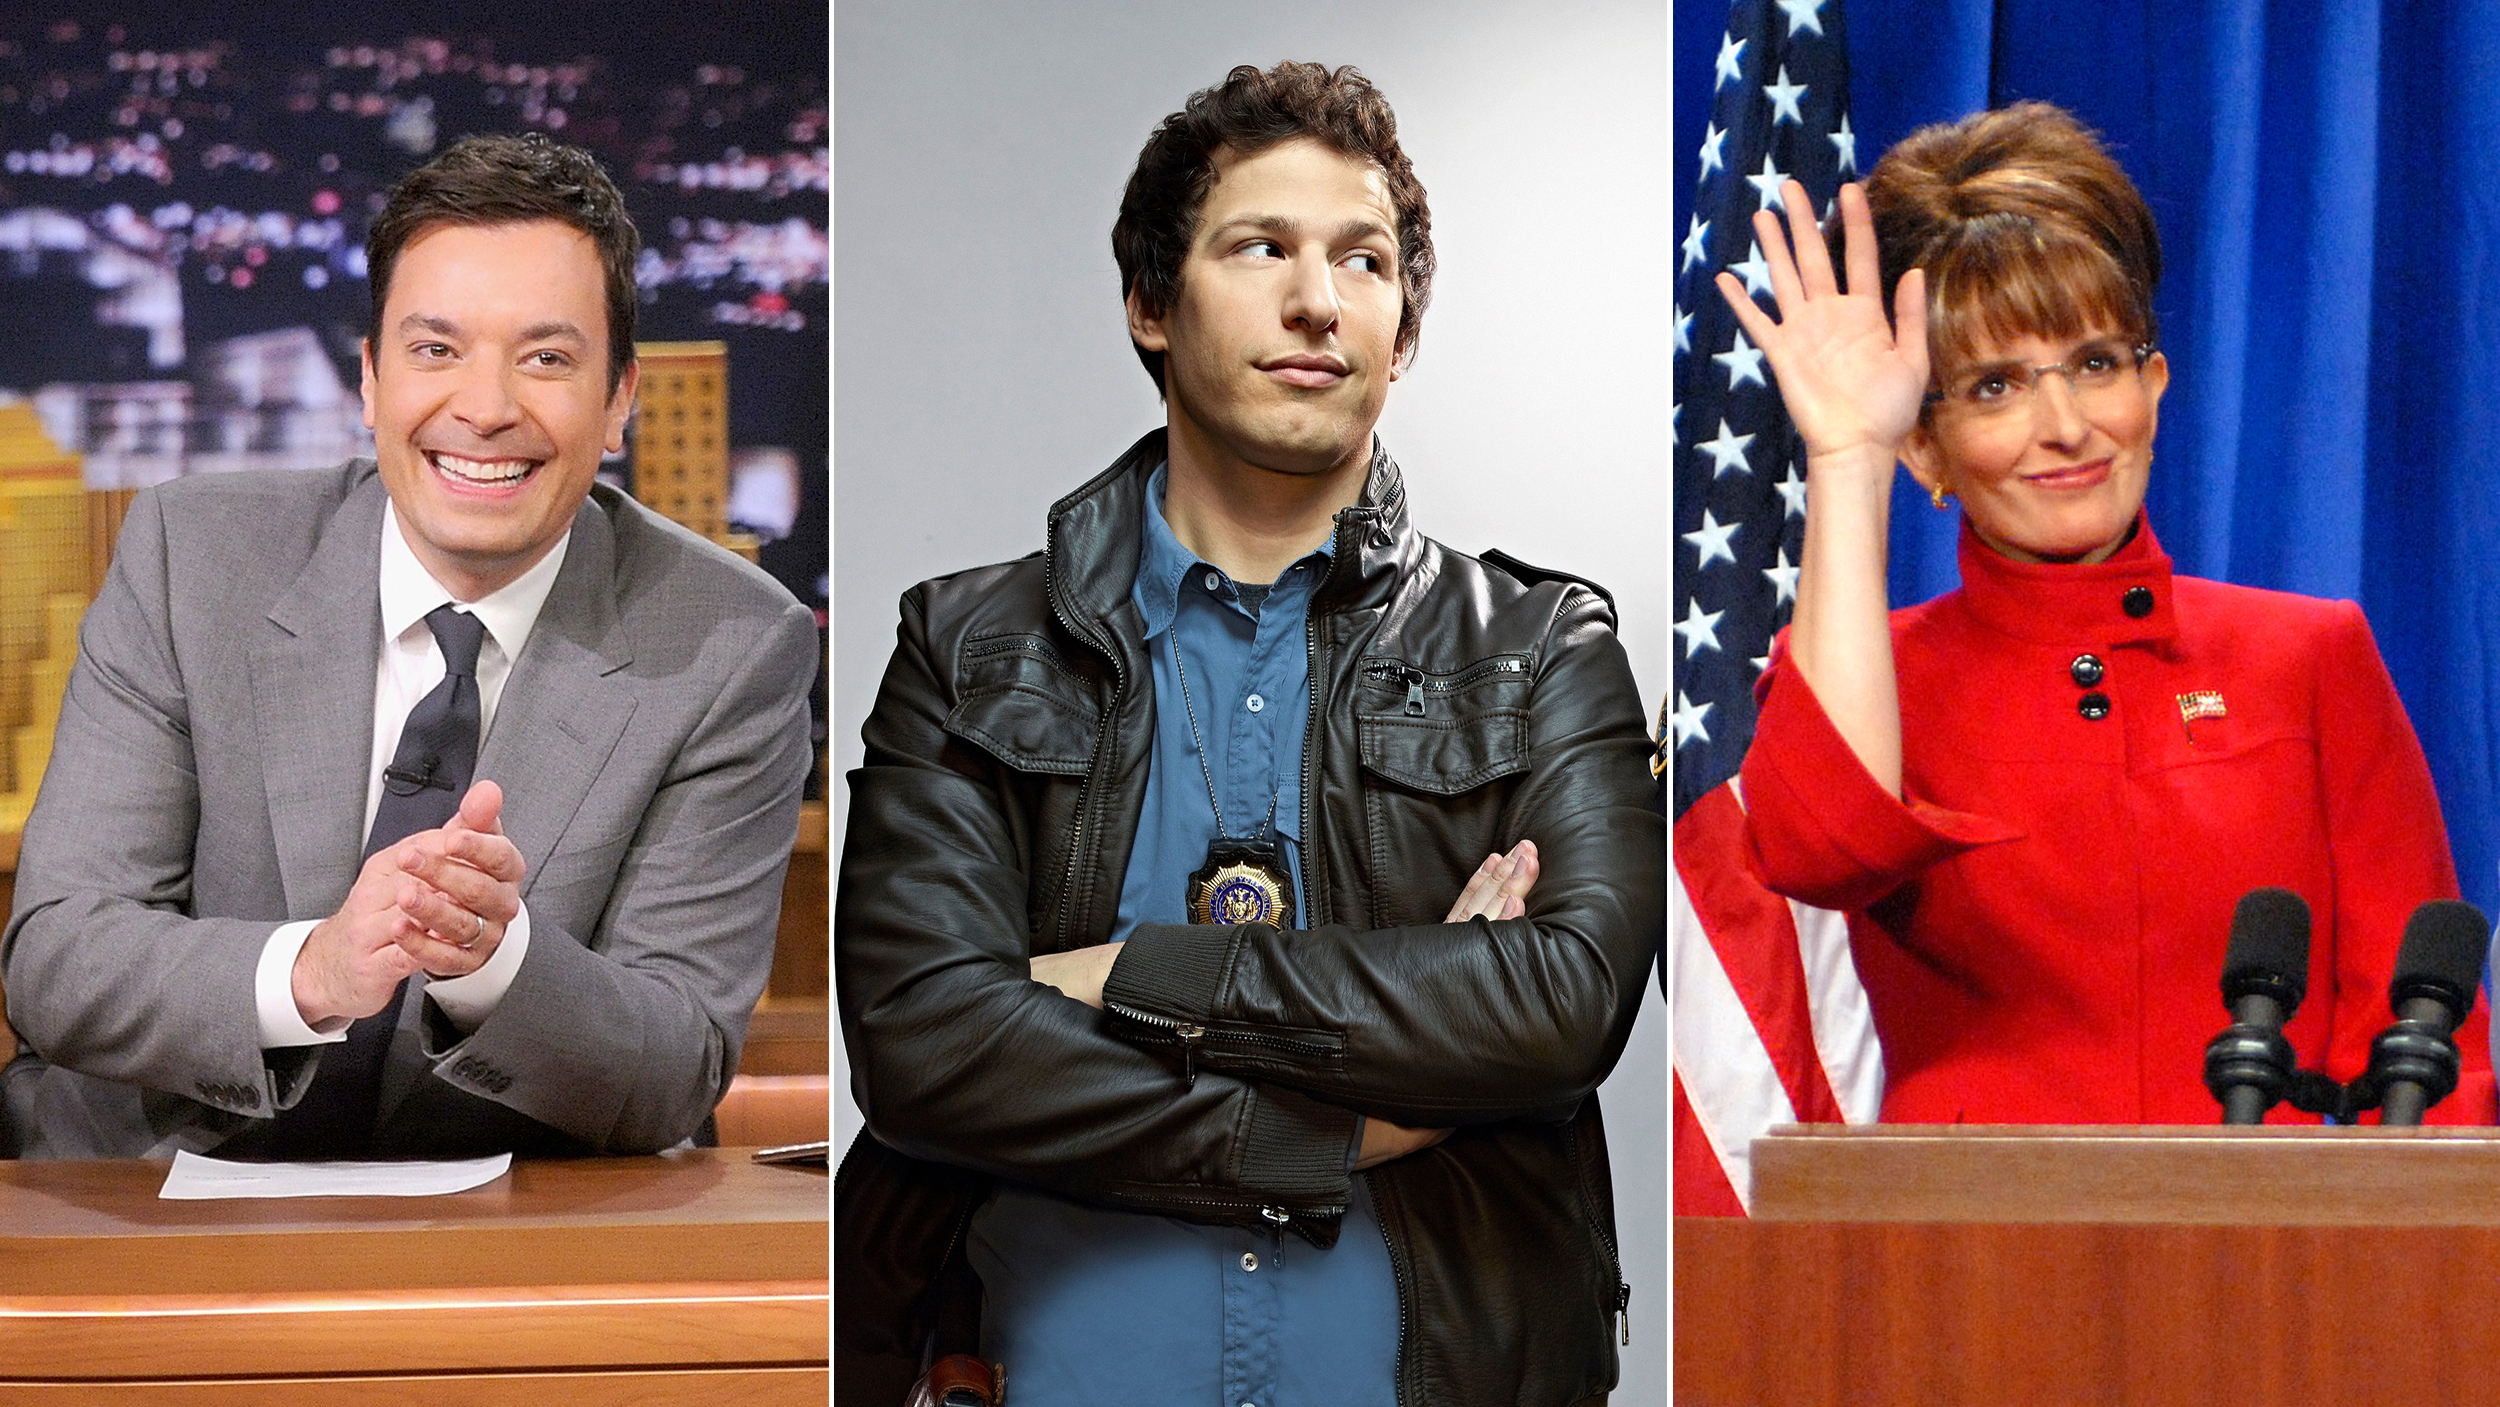 From Andy Samberg to Tina Fey: 'SNL' grads still tops in funny business